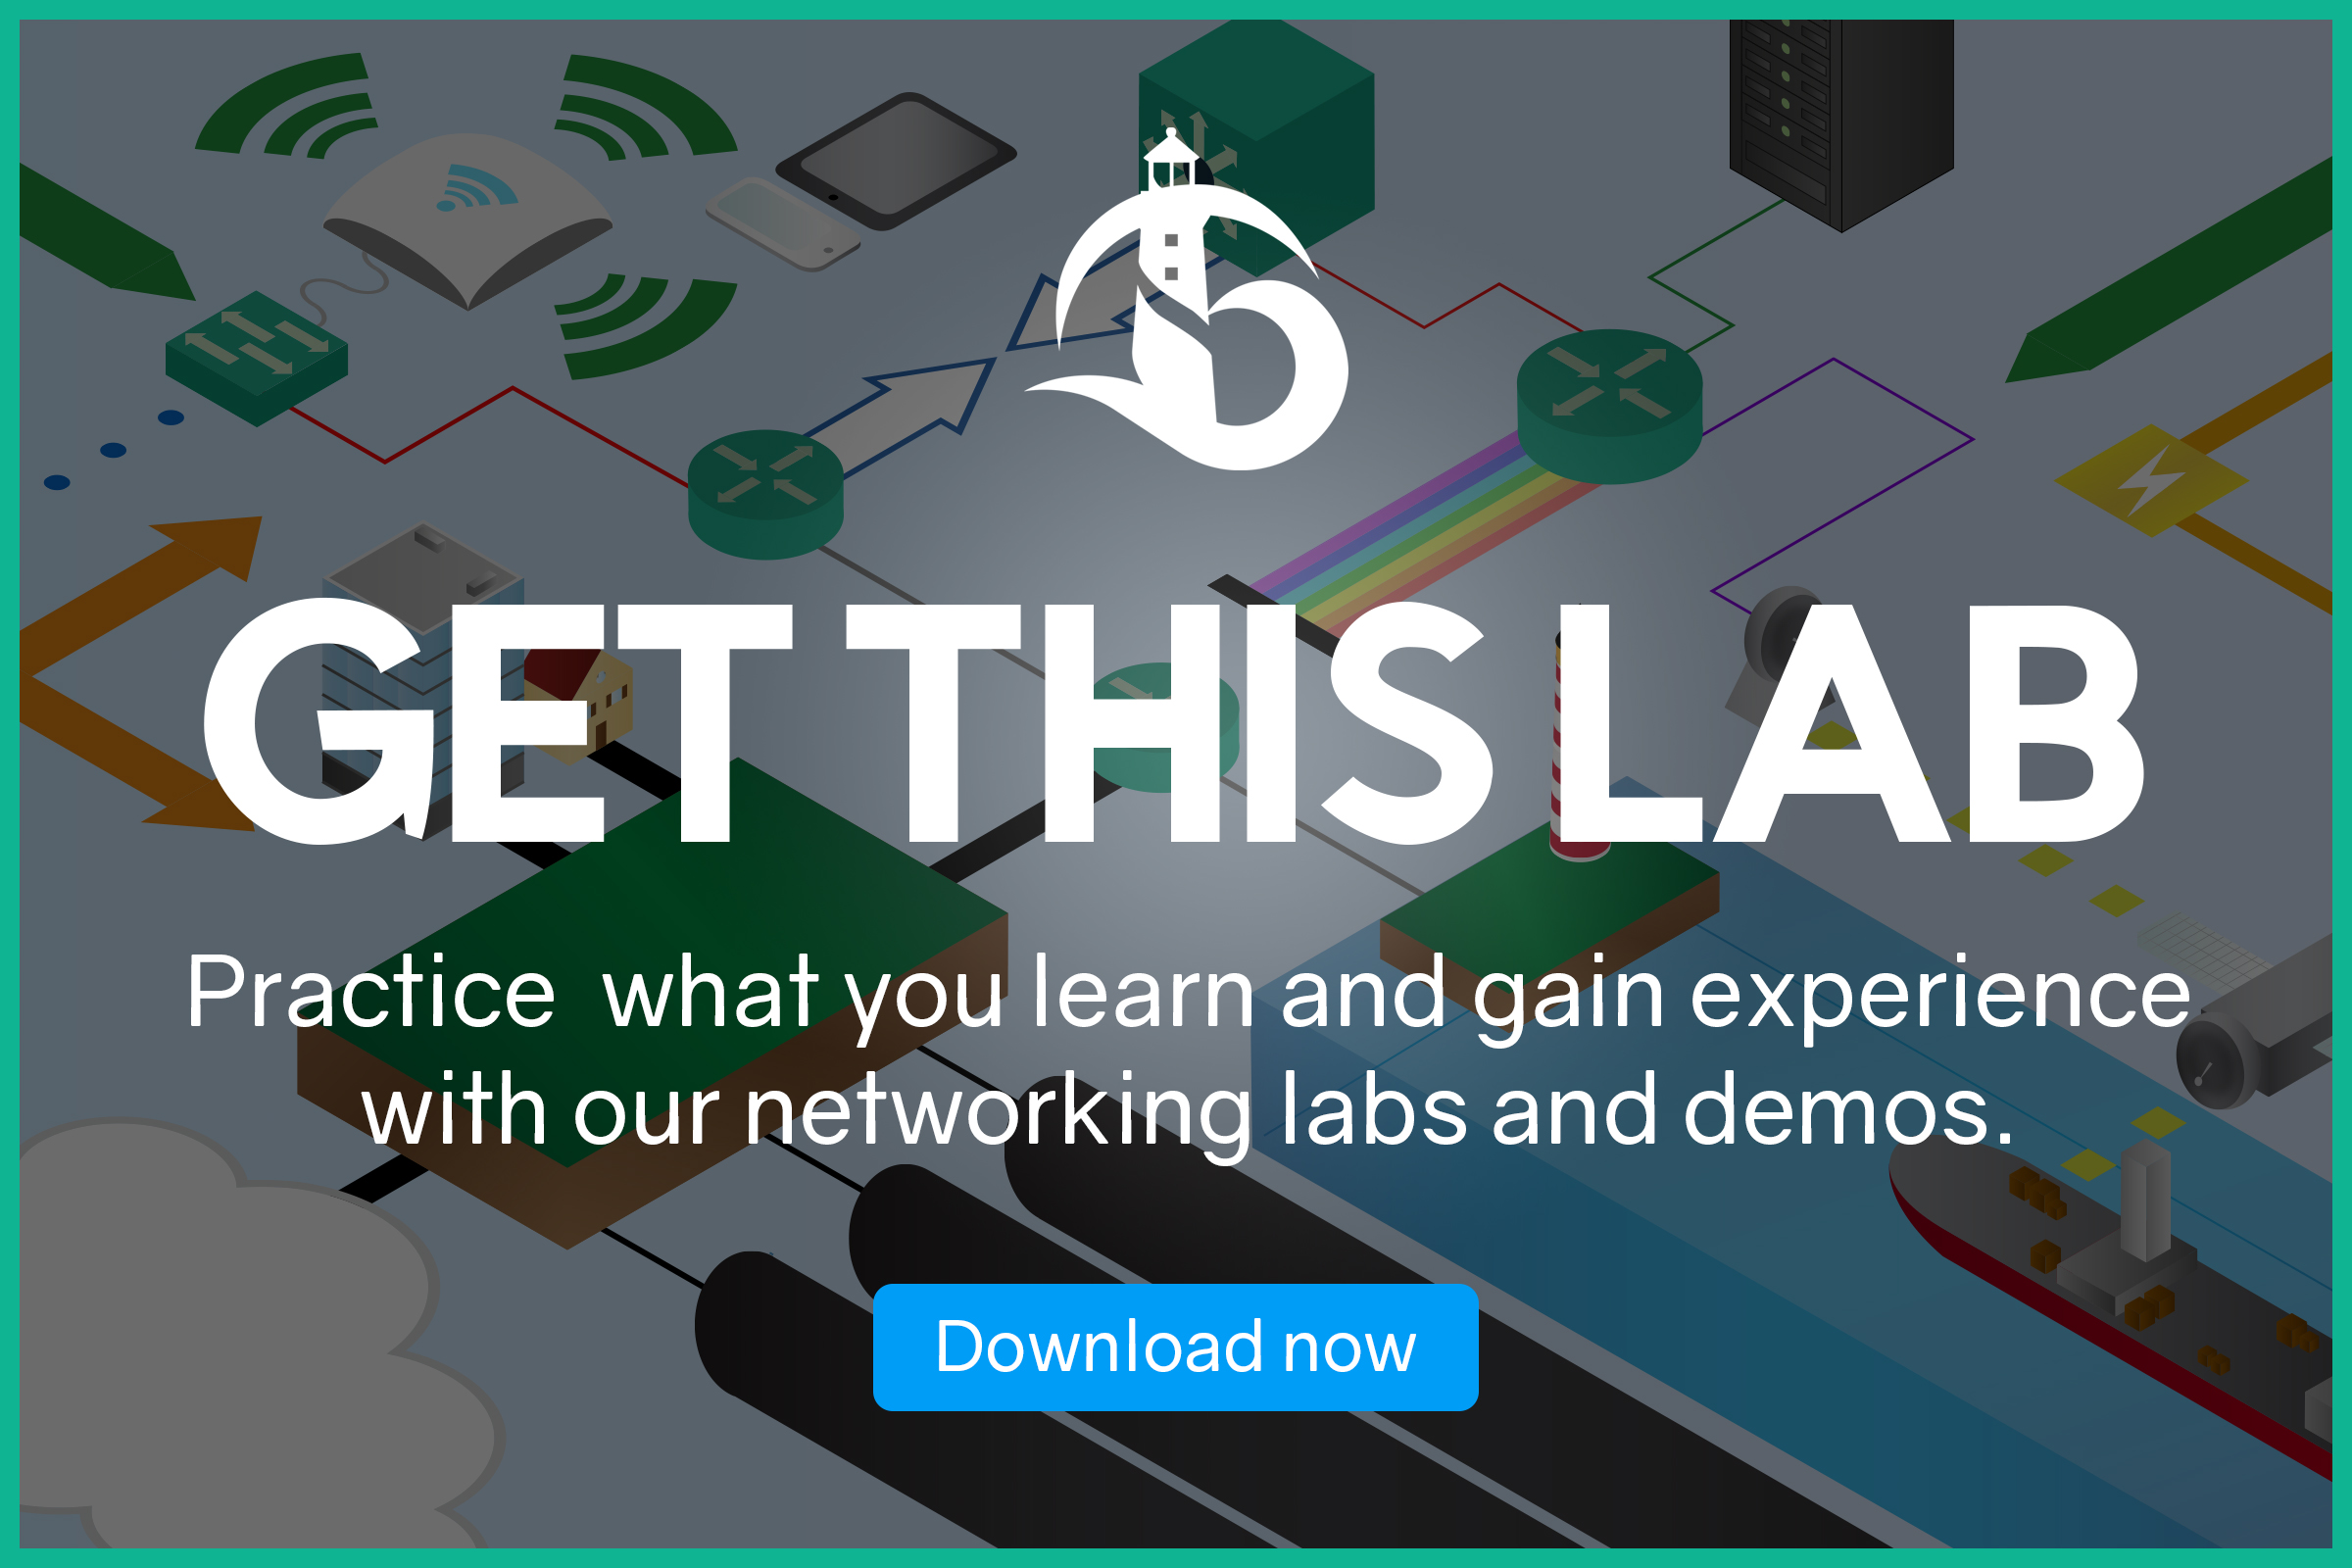 Get this lab! Practice what you learn and gain experience with our networking labs and demos - download now